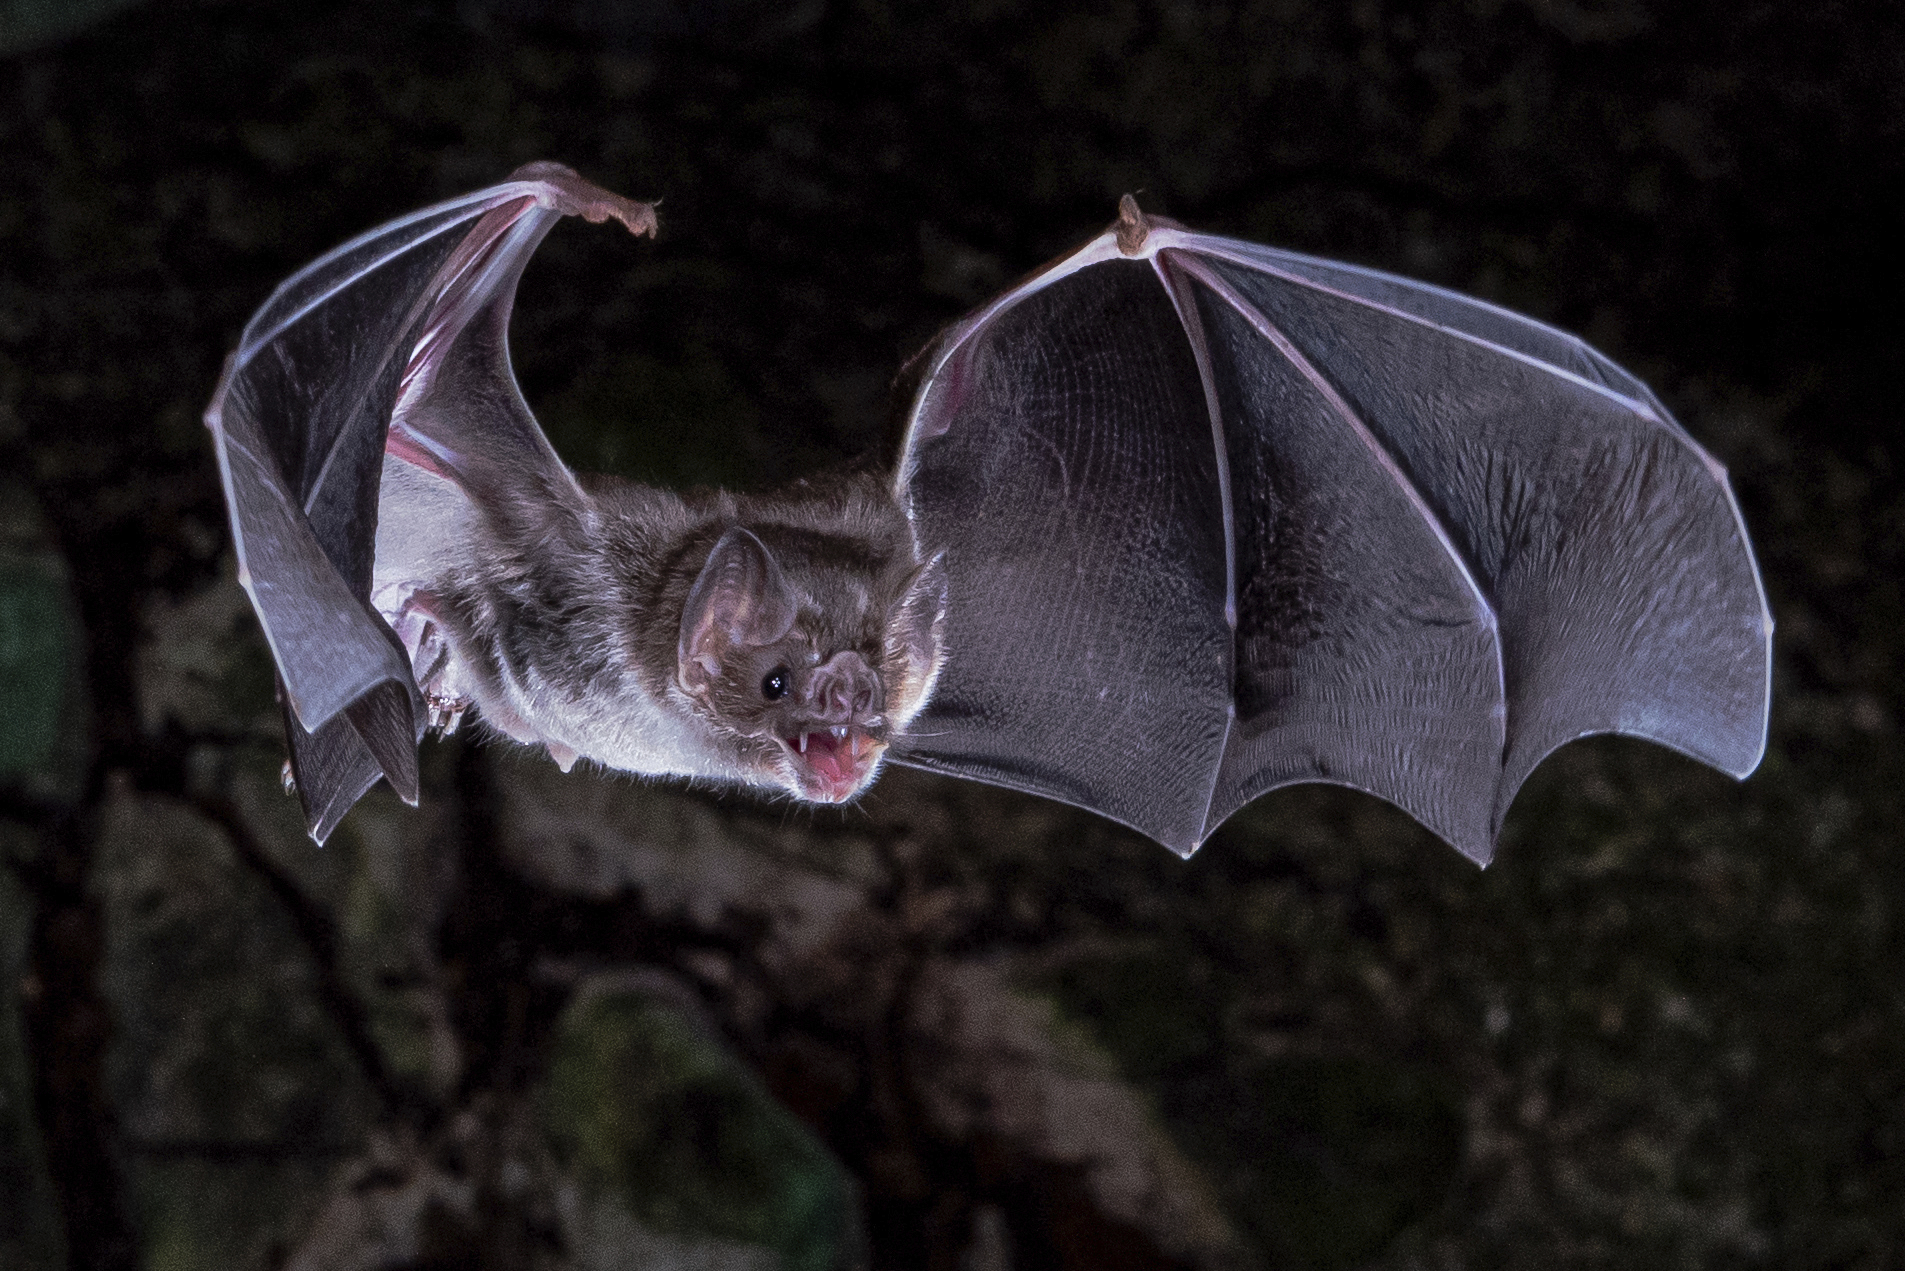 This photo provided by Sherri and Brock Fenton/AAAS in March 2022 shows a vampire bat in flight. According to a report published Friday, March 25, 2022 in the journal Science Advances, scientists have figured out why vampire bats are the only mammals that can survive on a diet of only blood. (Sherri and Brock Fenton/AAAS via AP)